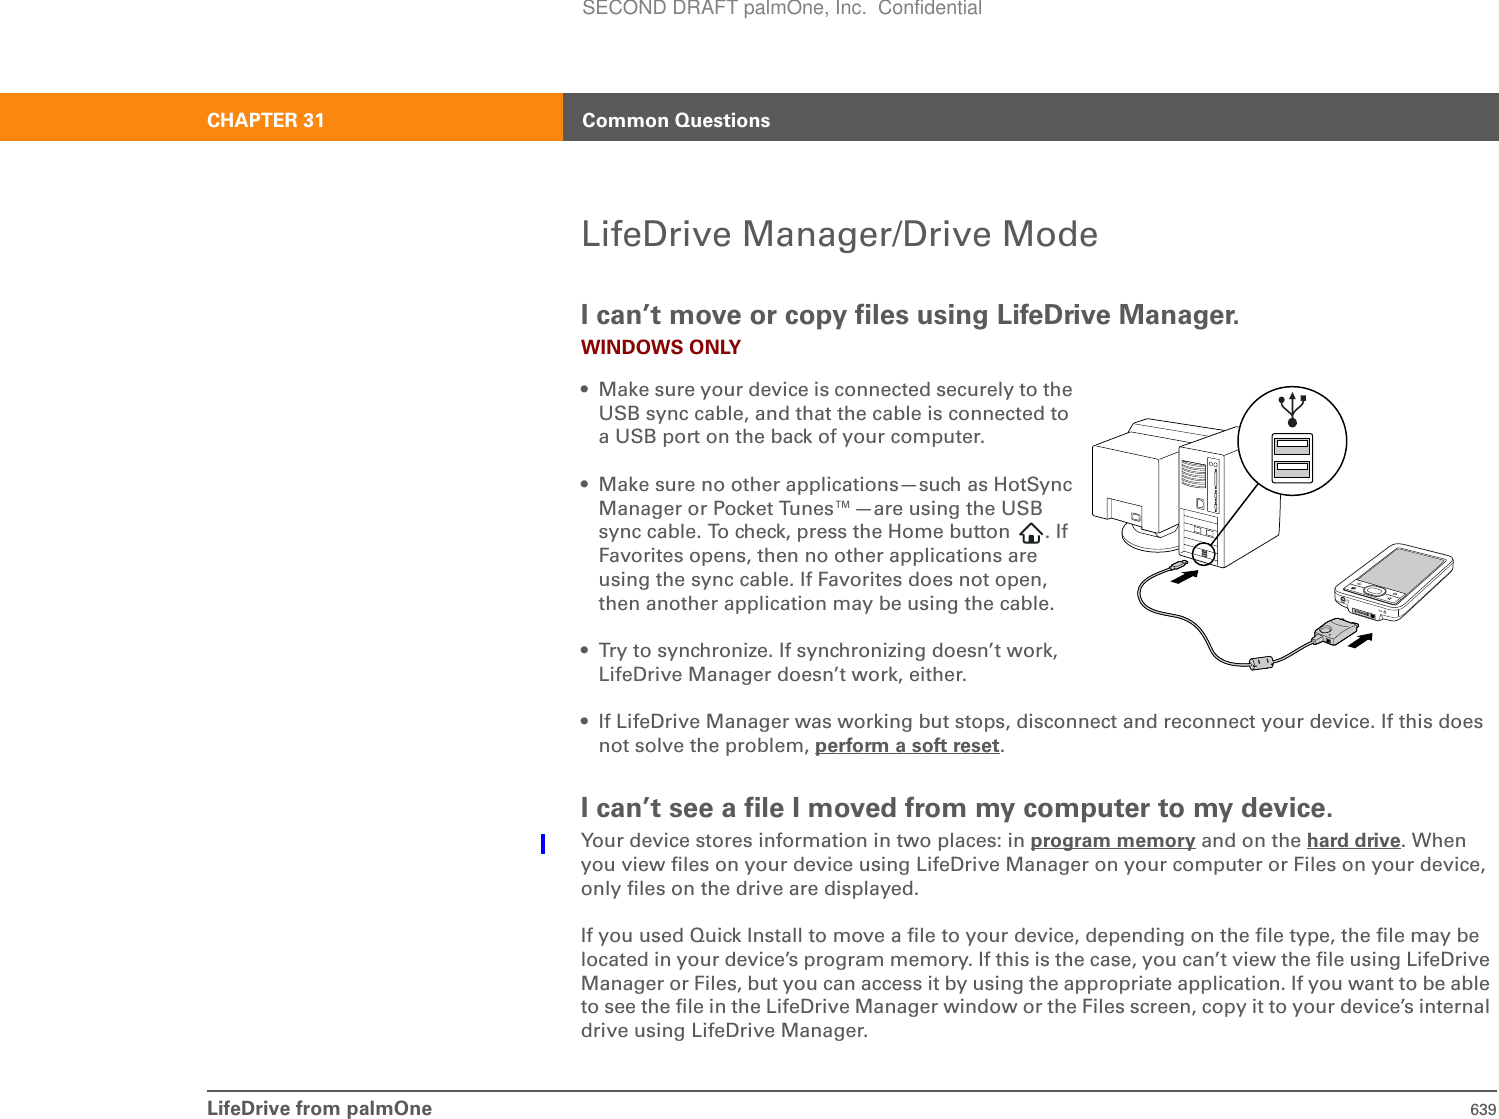 LifeDrive from palmOne 639CHAPTER 31 Common QuestionsLifeDrive Manager/Drive ModeI can’t move or copy files using LifeDrive Manager.WINDOWS ONLY• Make sure your device is connected securely to the USB sync cable, and that the cable is connected to a USB port on the back of your computer.• Make sure no other applications—such as HotSync Manager or Pocket Tunes™—are using the USB sync cable. To check, press the Home button  . If Favorites opens, then no other applications are using the sync cable. If Favorites does not open, then another application may be using the cable.• Try to synchronize. If synchronizing doesn’t work, LifeDrive Manager doesn’t work, either.• If LifeDrive Manager was working but stops, disconnect and reconnect your device. If this does not solve the problem, perform a soft reset.I can’t see a file I moved from my computer to my device.Your device stores information in two places: in program memory and on the hard drive. When you view files on your device using LifeDrive Manager on your computer or Files on your device, only files on the drive are displayed.If you used Quick Install to move a file to your device, depending on the file type, the file may be located in your device’s program memory. If this is the case, you can’t view the file using LifeDrive Manager or Files, but you can access it by using the appropriate application. If you want to be able to see the file in the LifeDrive Manager window or the Files screen, copy it to your device’s internal drive using LifeDrive Manager.SECOND DRAFT palmOne, Inc.  Confidential